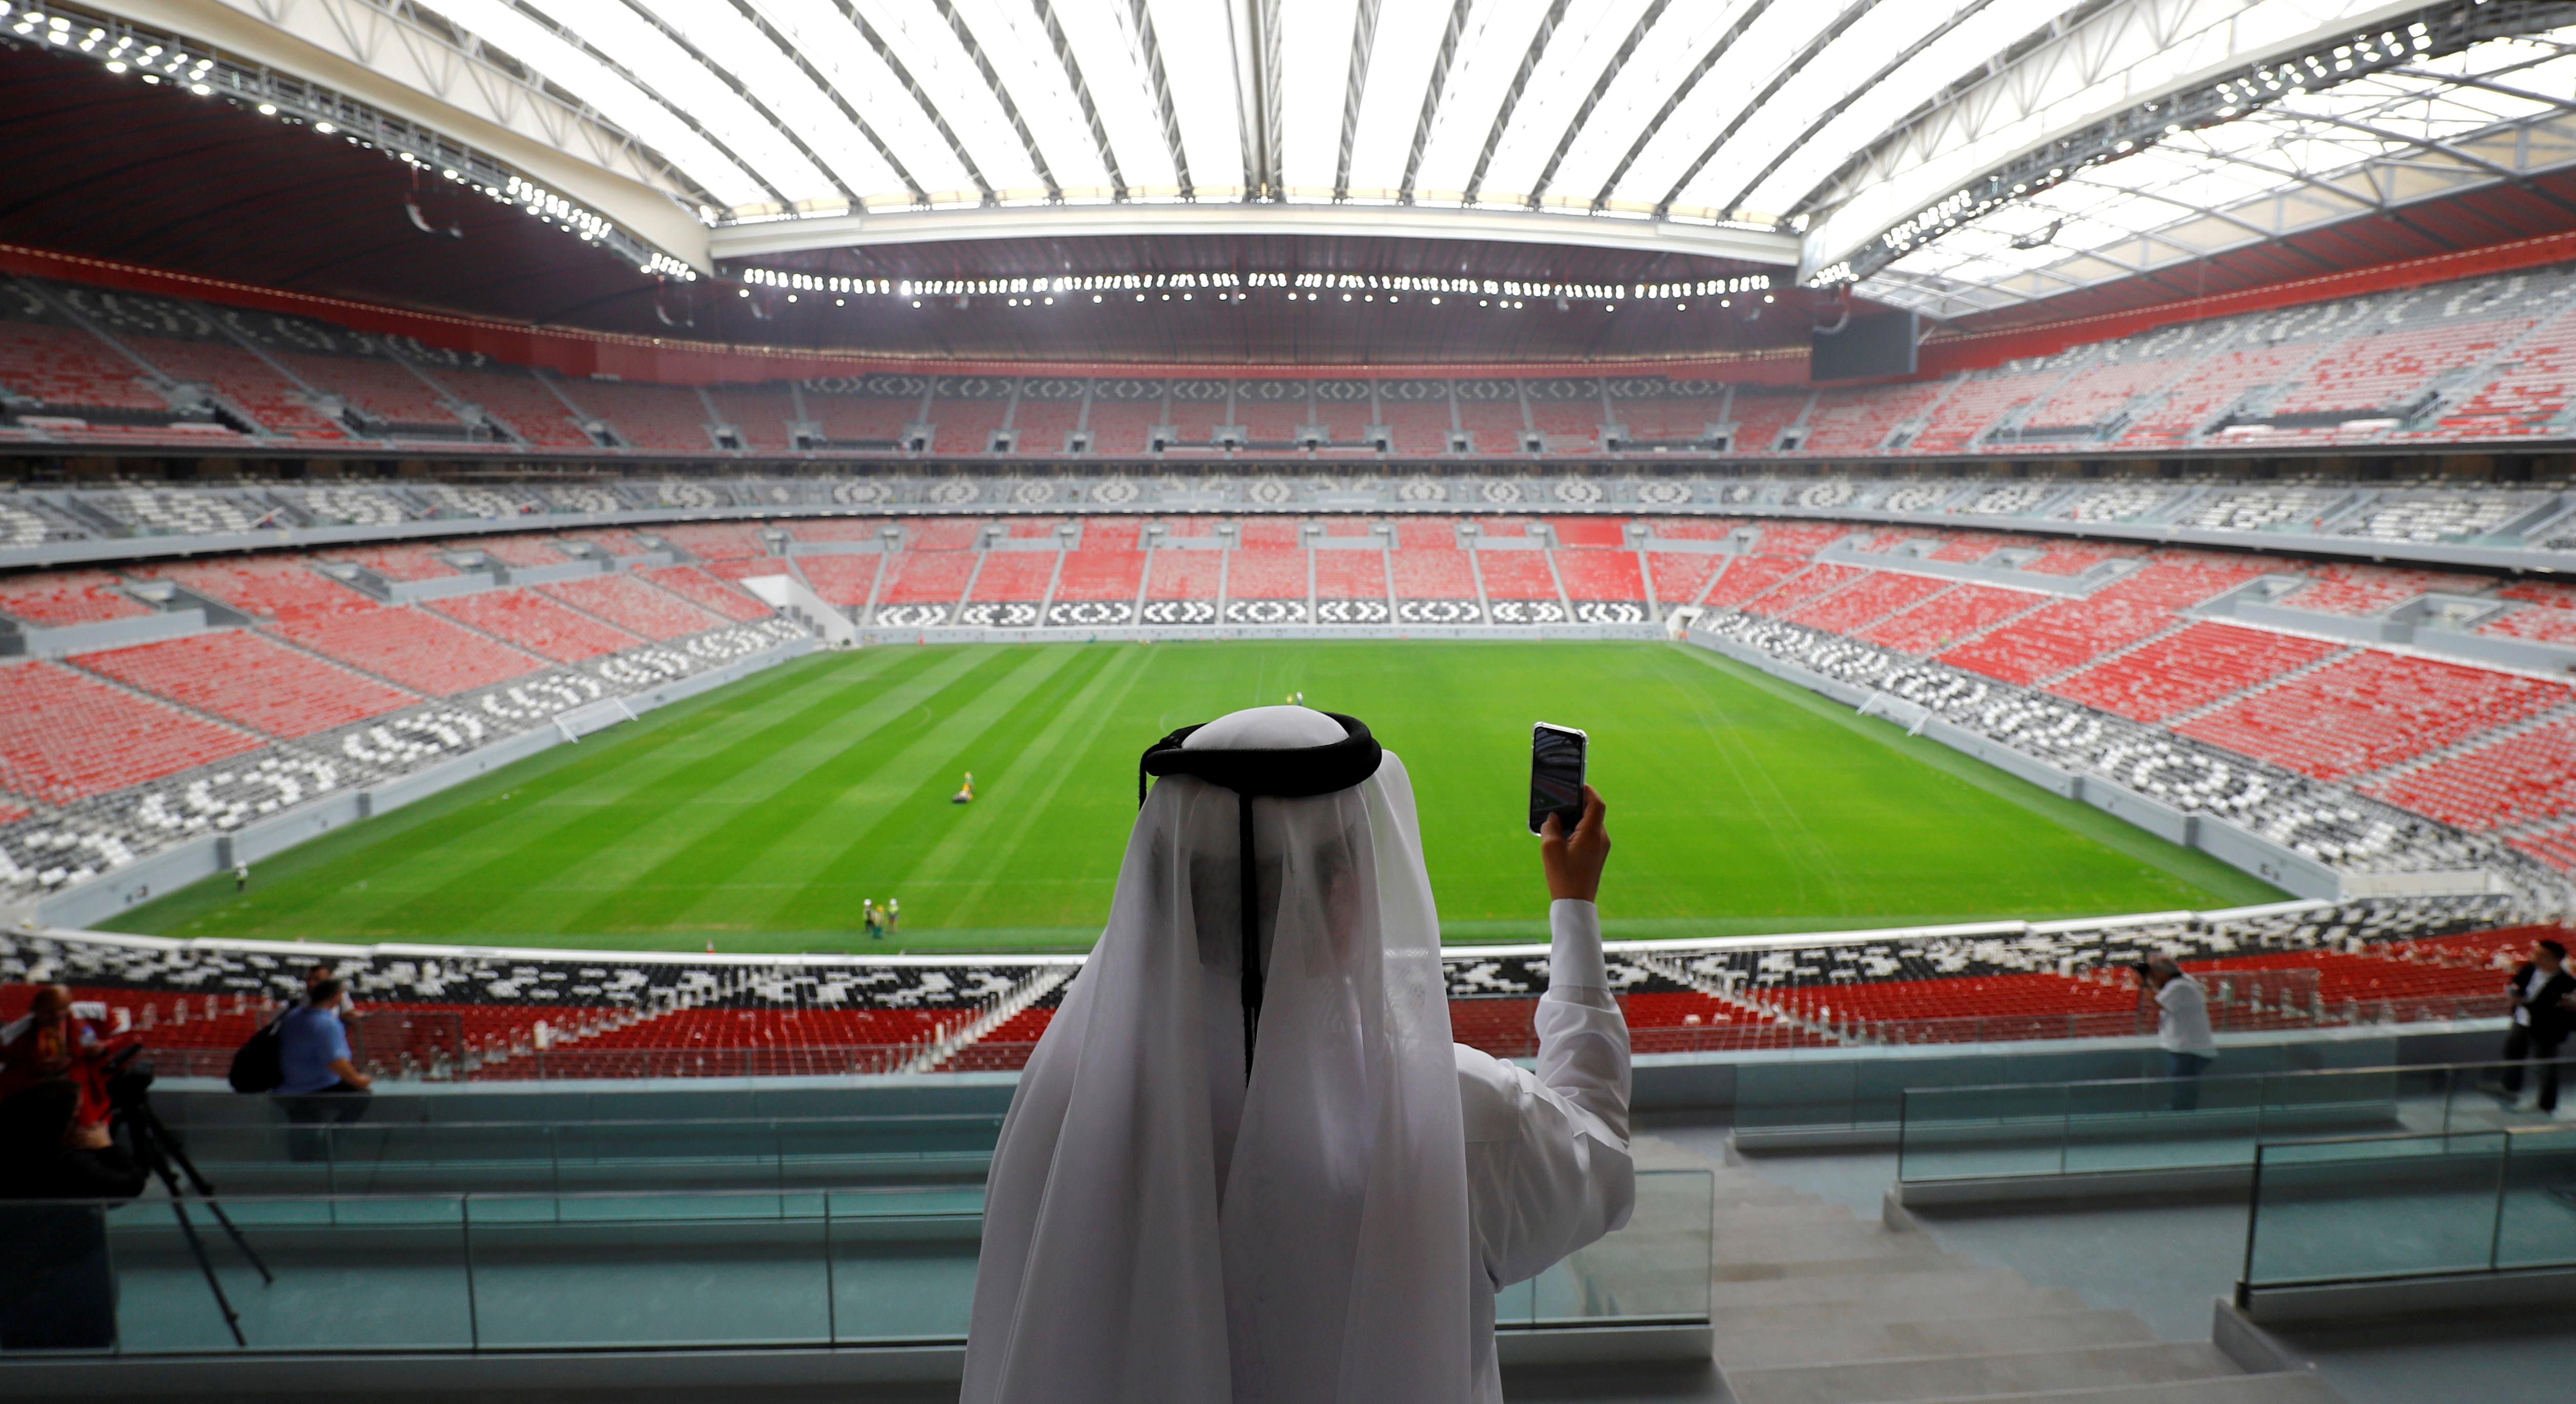 FILE PHOTO: A general view shows the Al Bayt stadium, built for the upcoming 2022 FIFA World Cup soccer championship, during a stadium tour in Al Khor, north of Doha, Qatar December 17, 2019.  REUTERS/Kai Pfaffenbach/File Photo